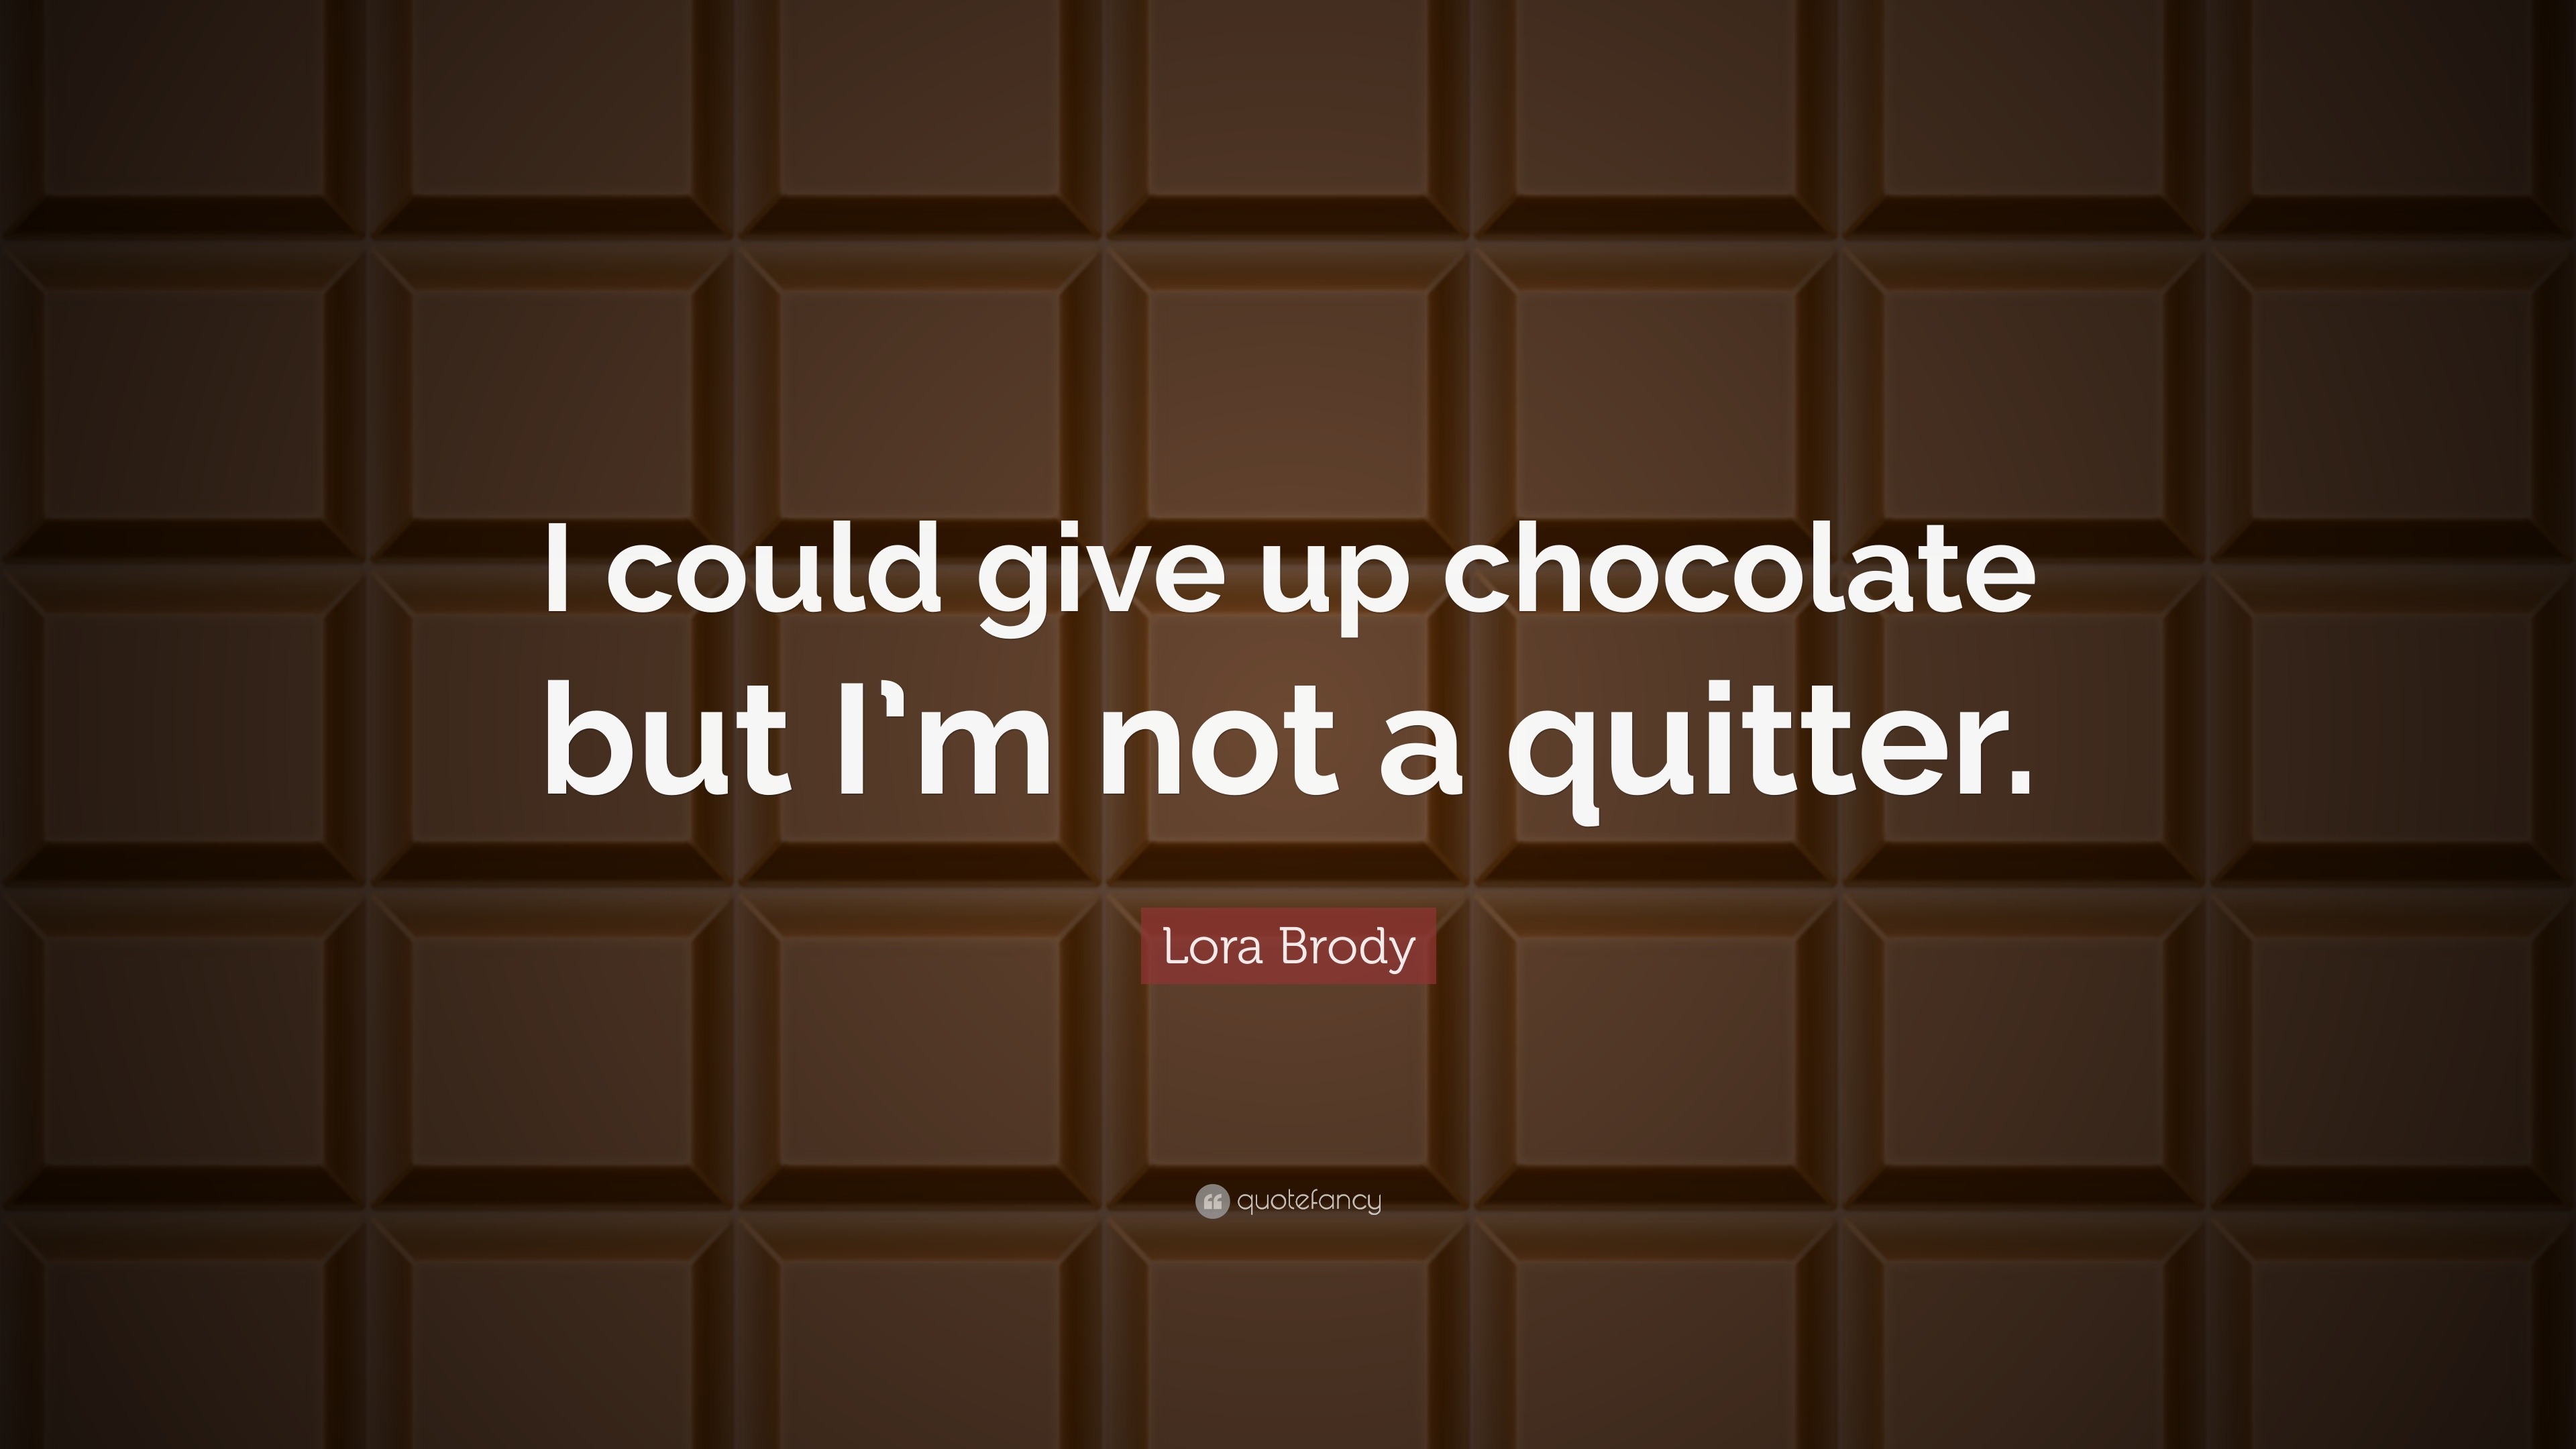 Lora Brody Quote “I could give up chocolate but I m not a